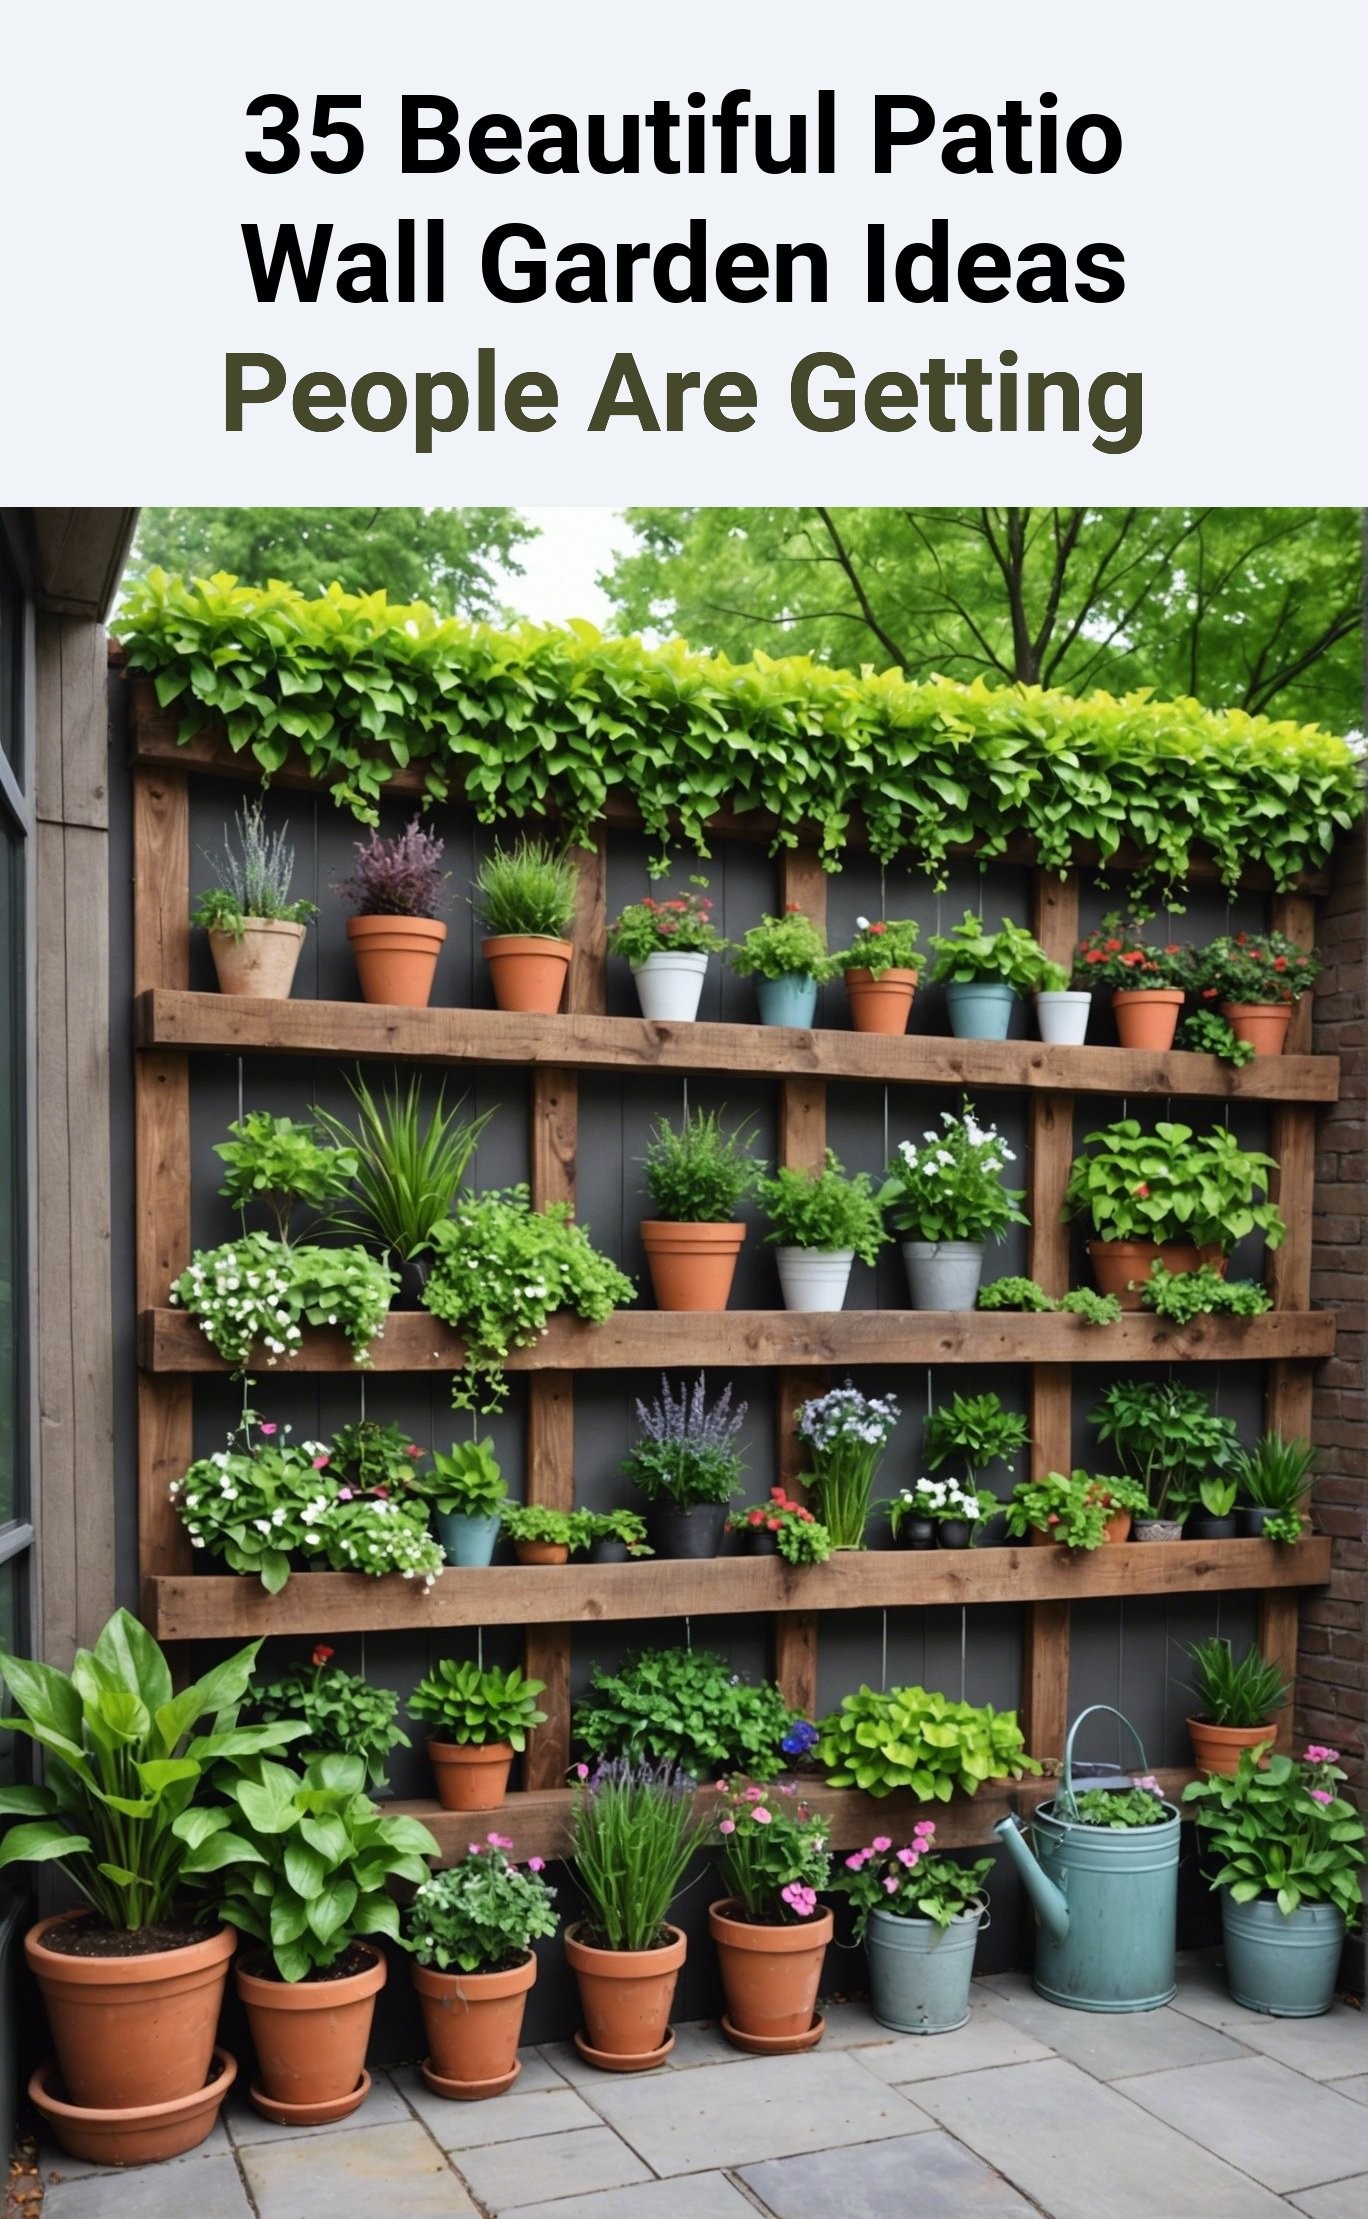 35 Beautiful Patio Wall Garden Ideas People Are Getting